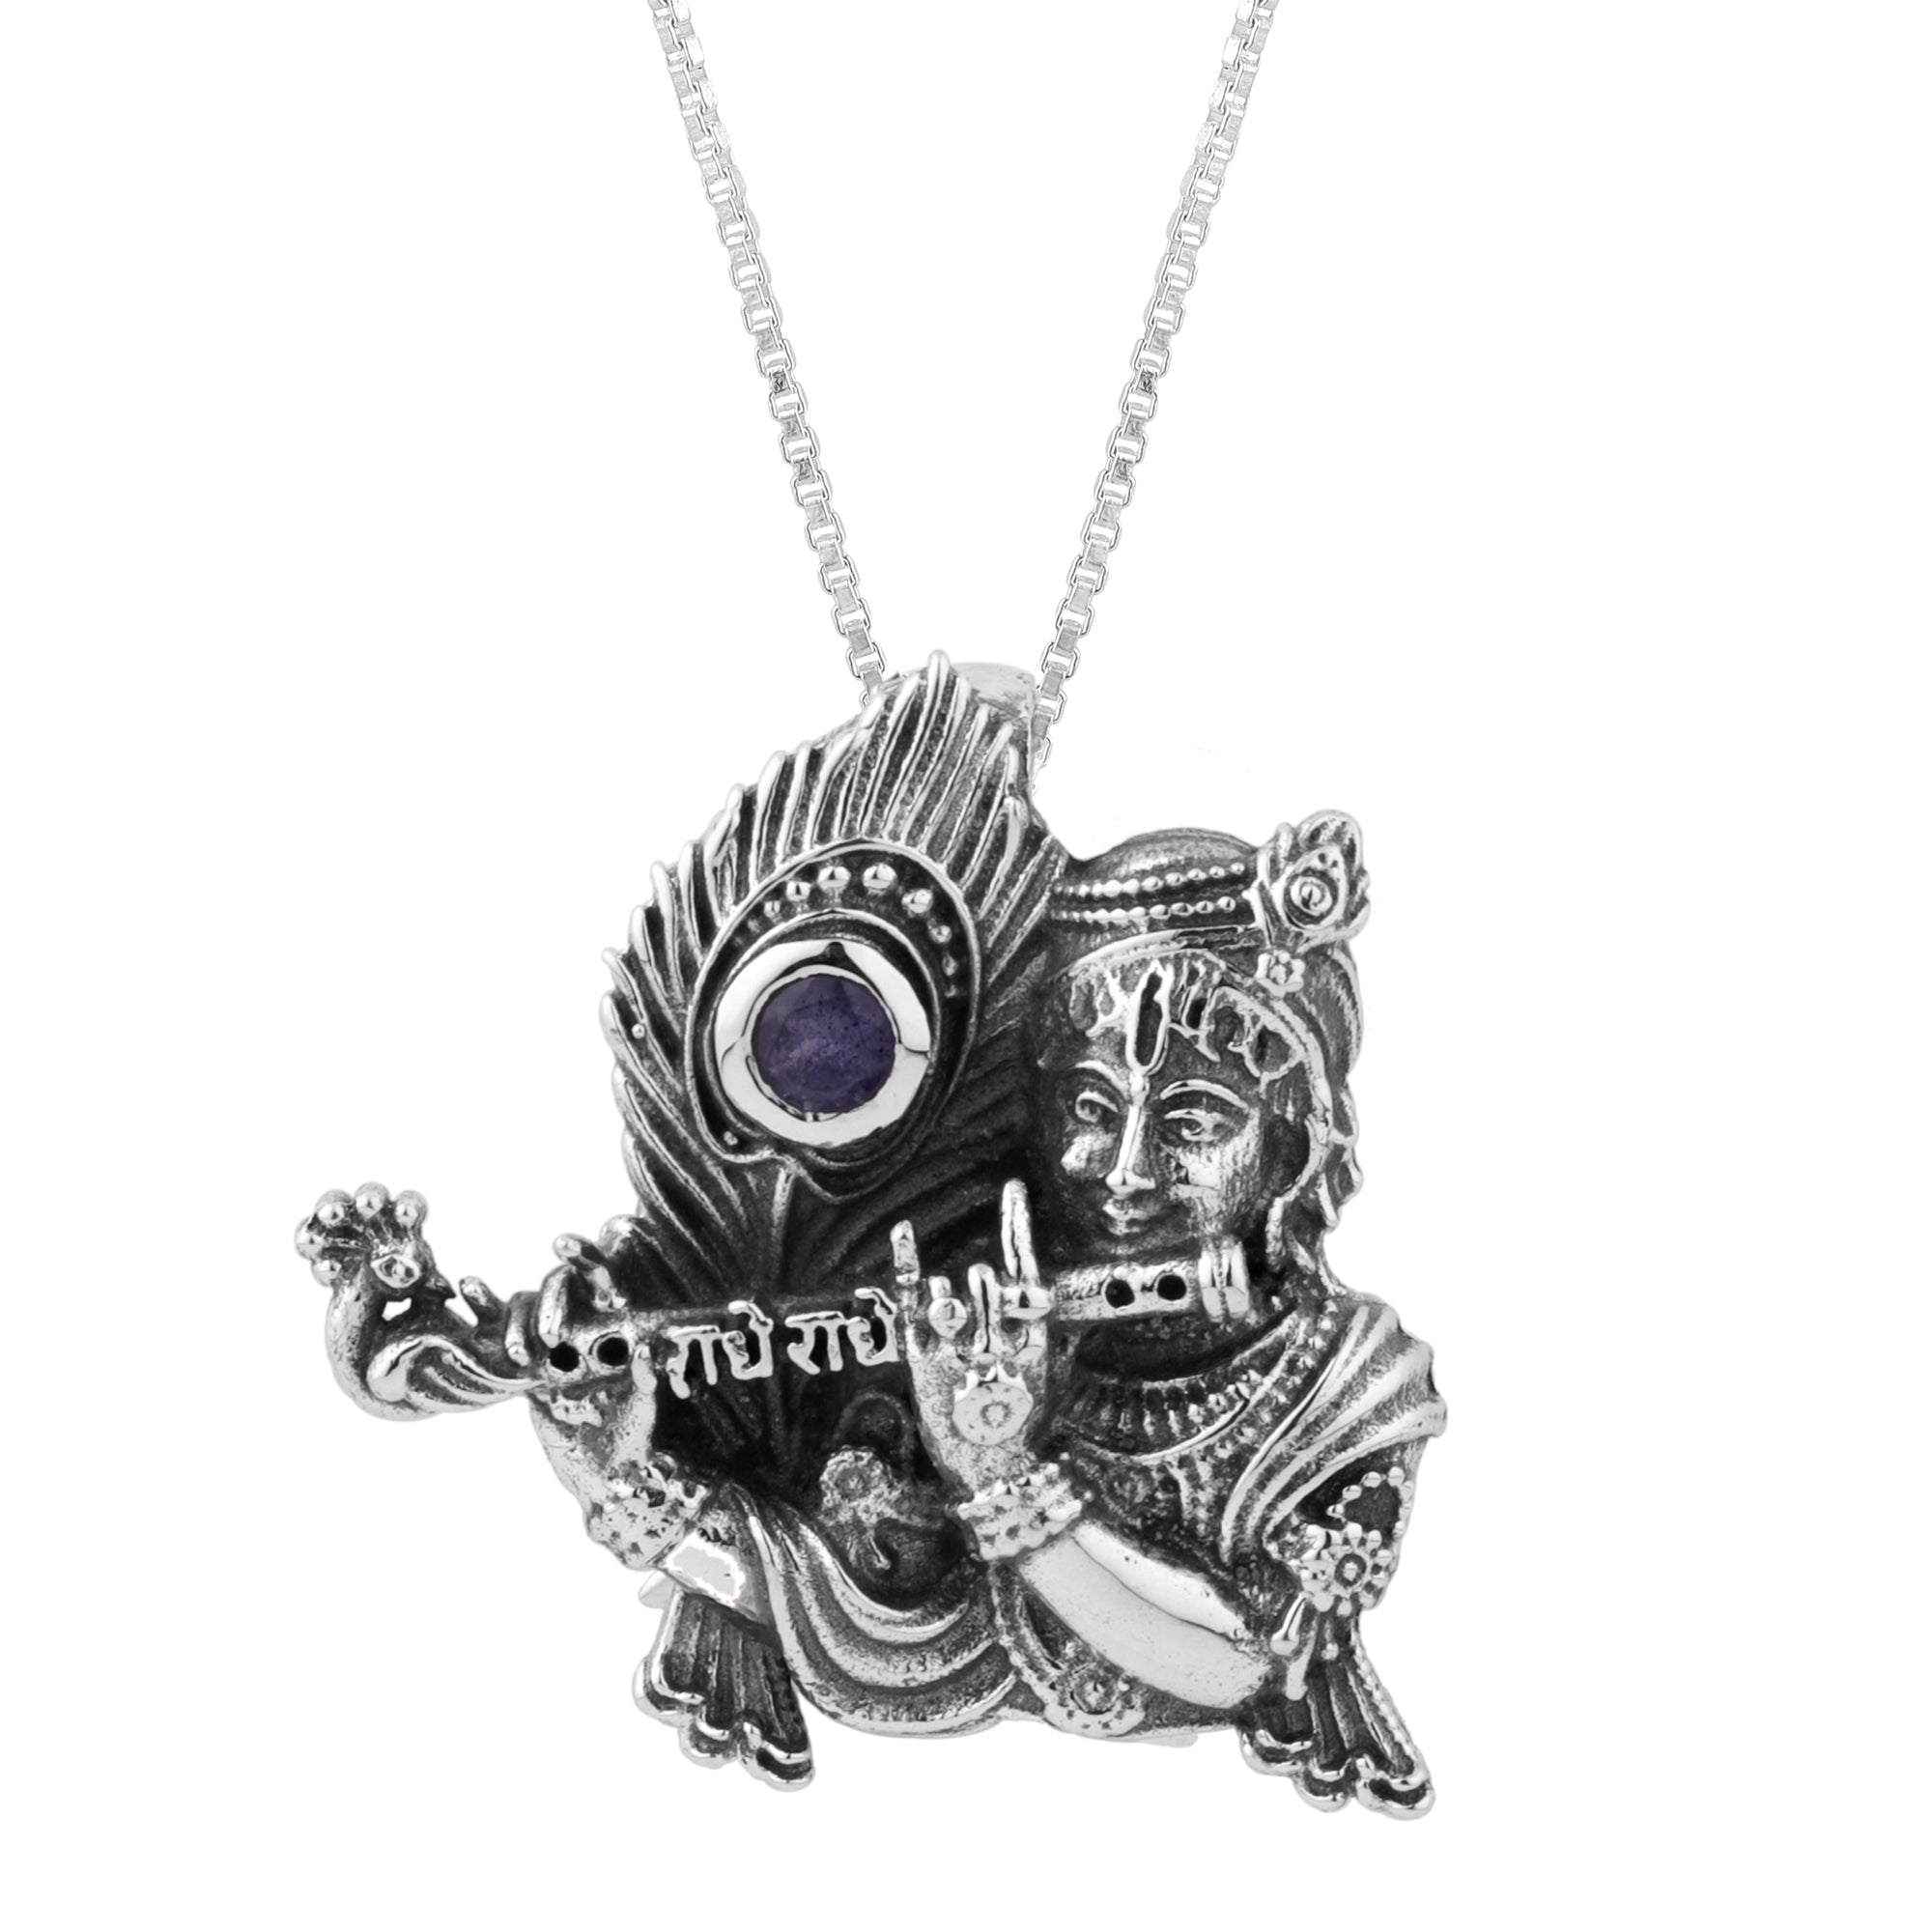 Krishna Engraved Mantra Pendant with Cows